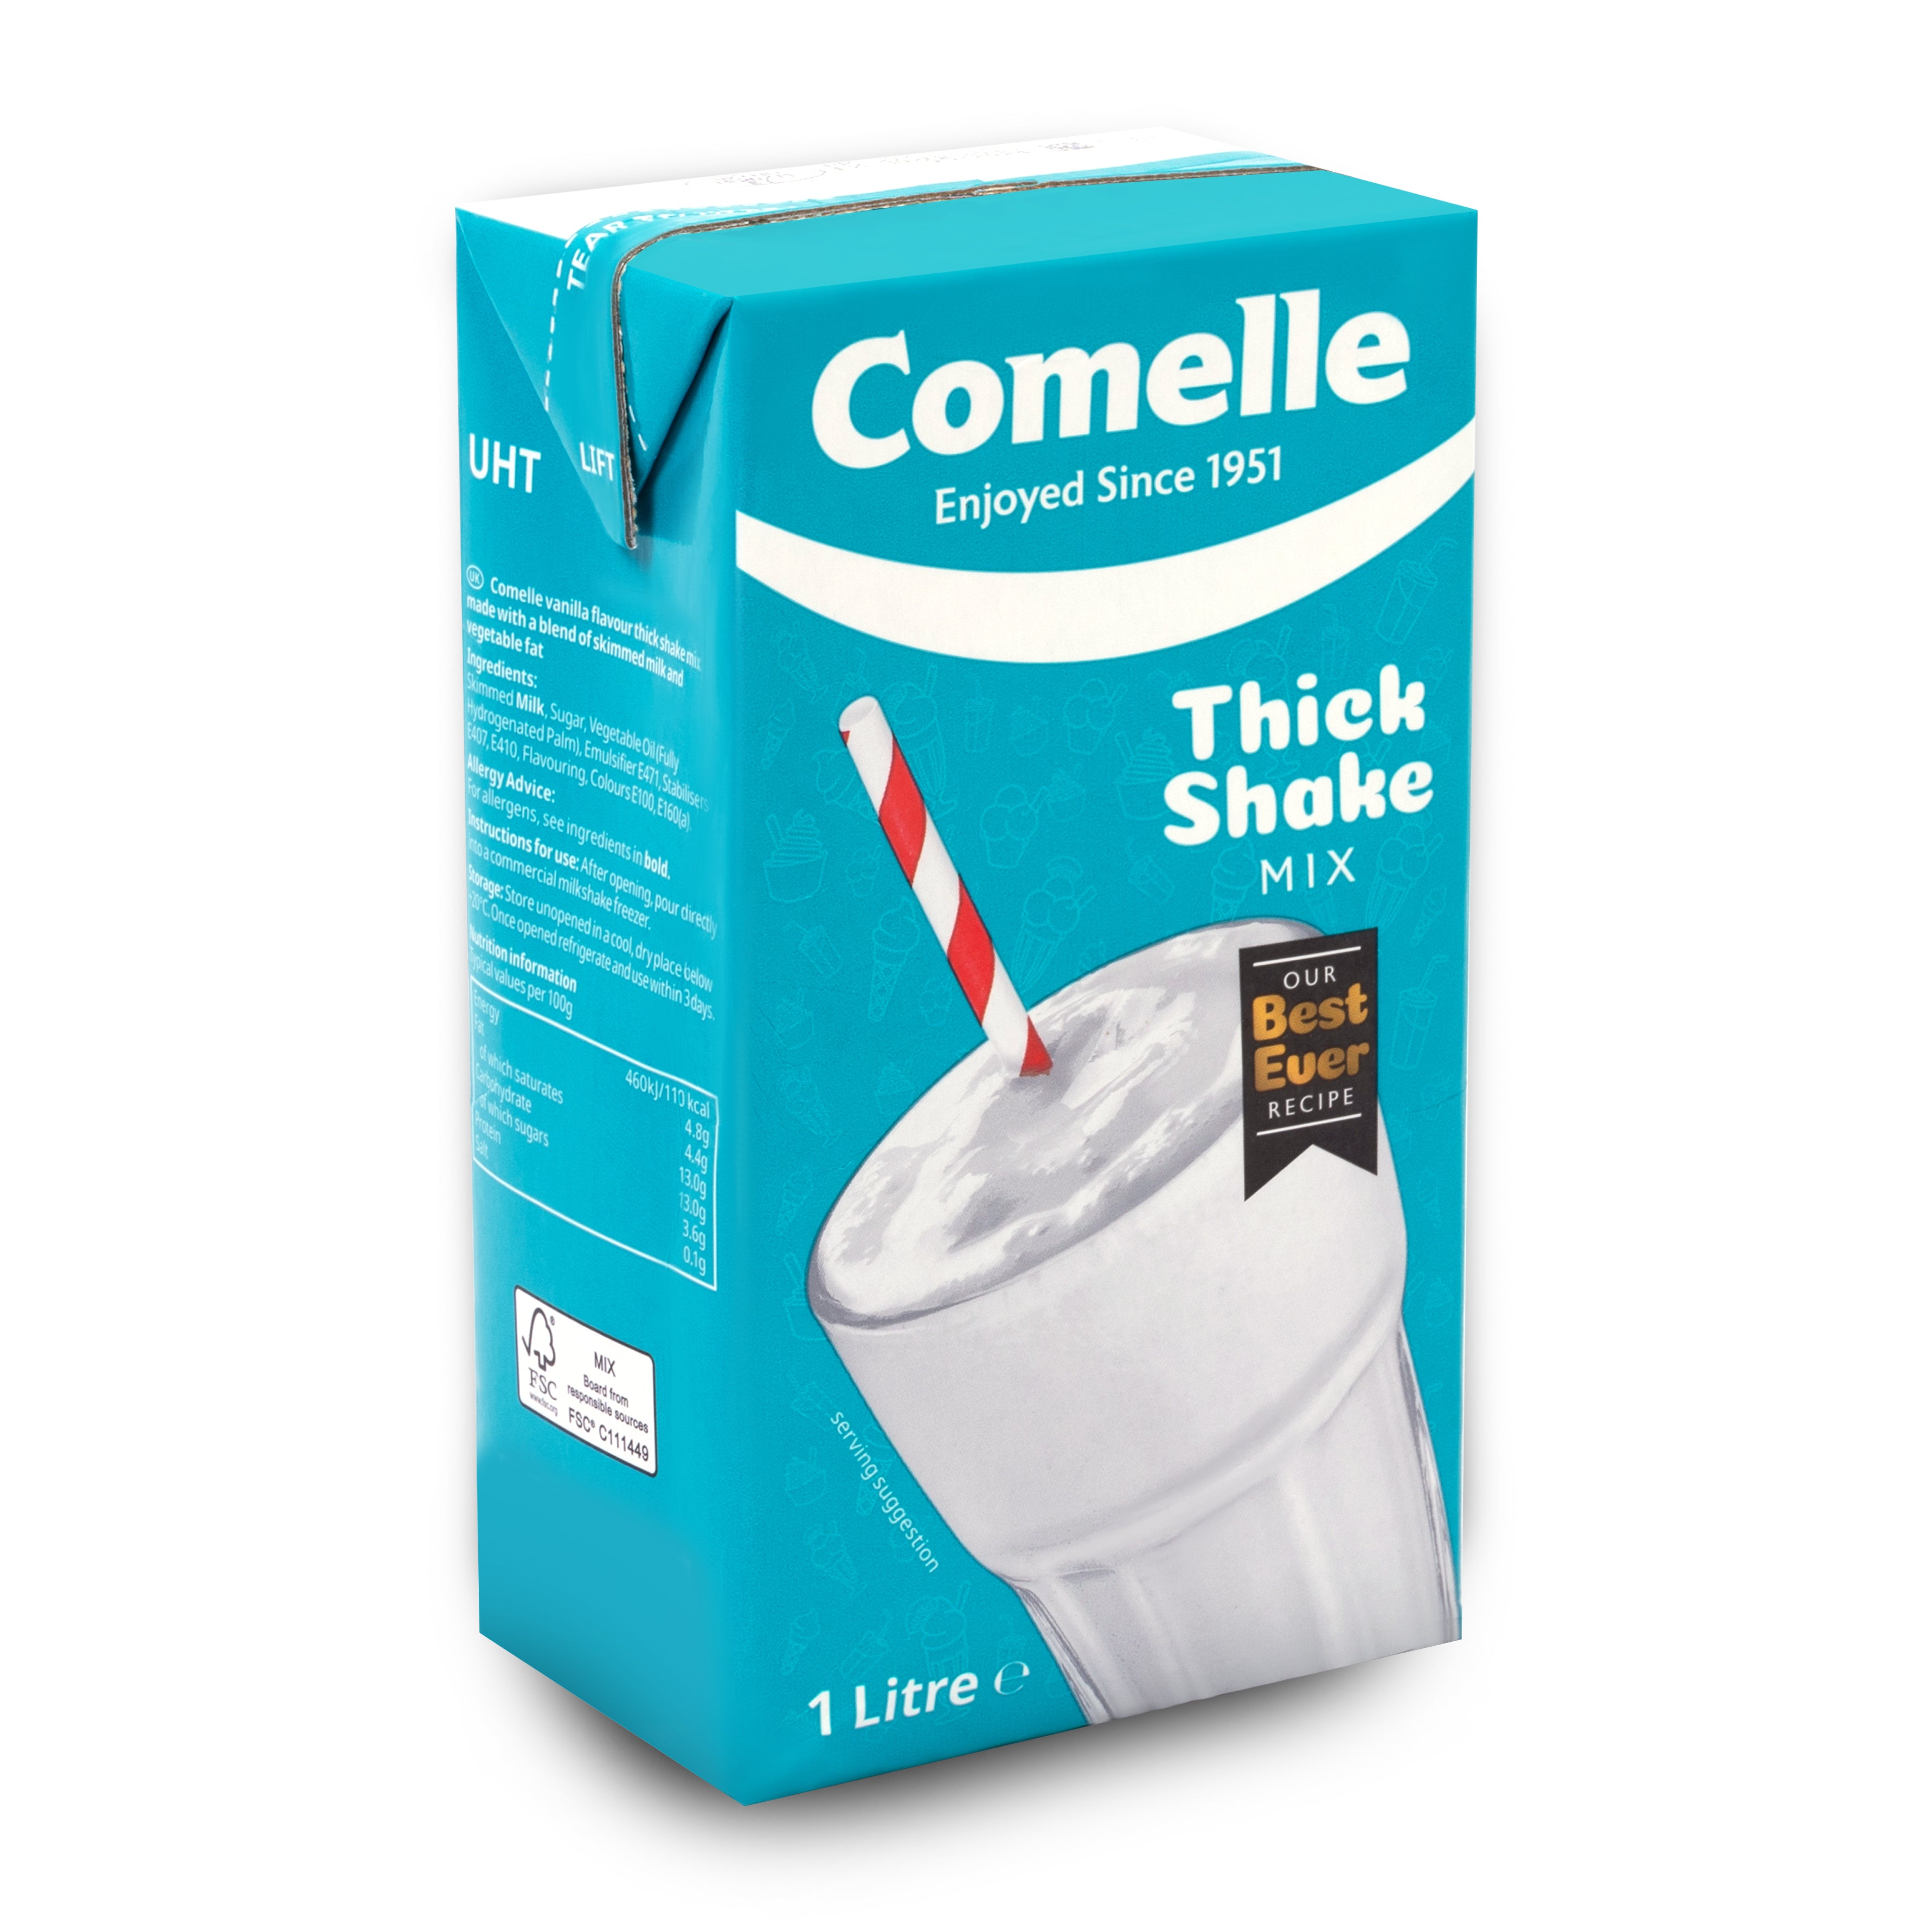 Comelle Thick Shake Mix 12 x 1LR